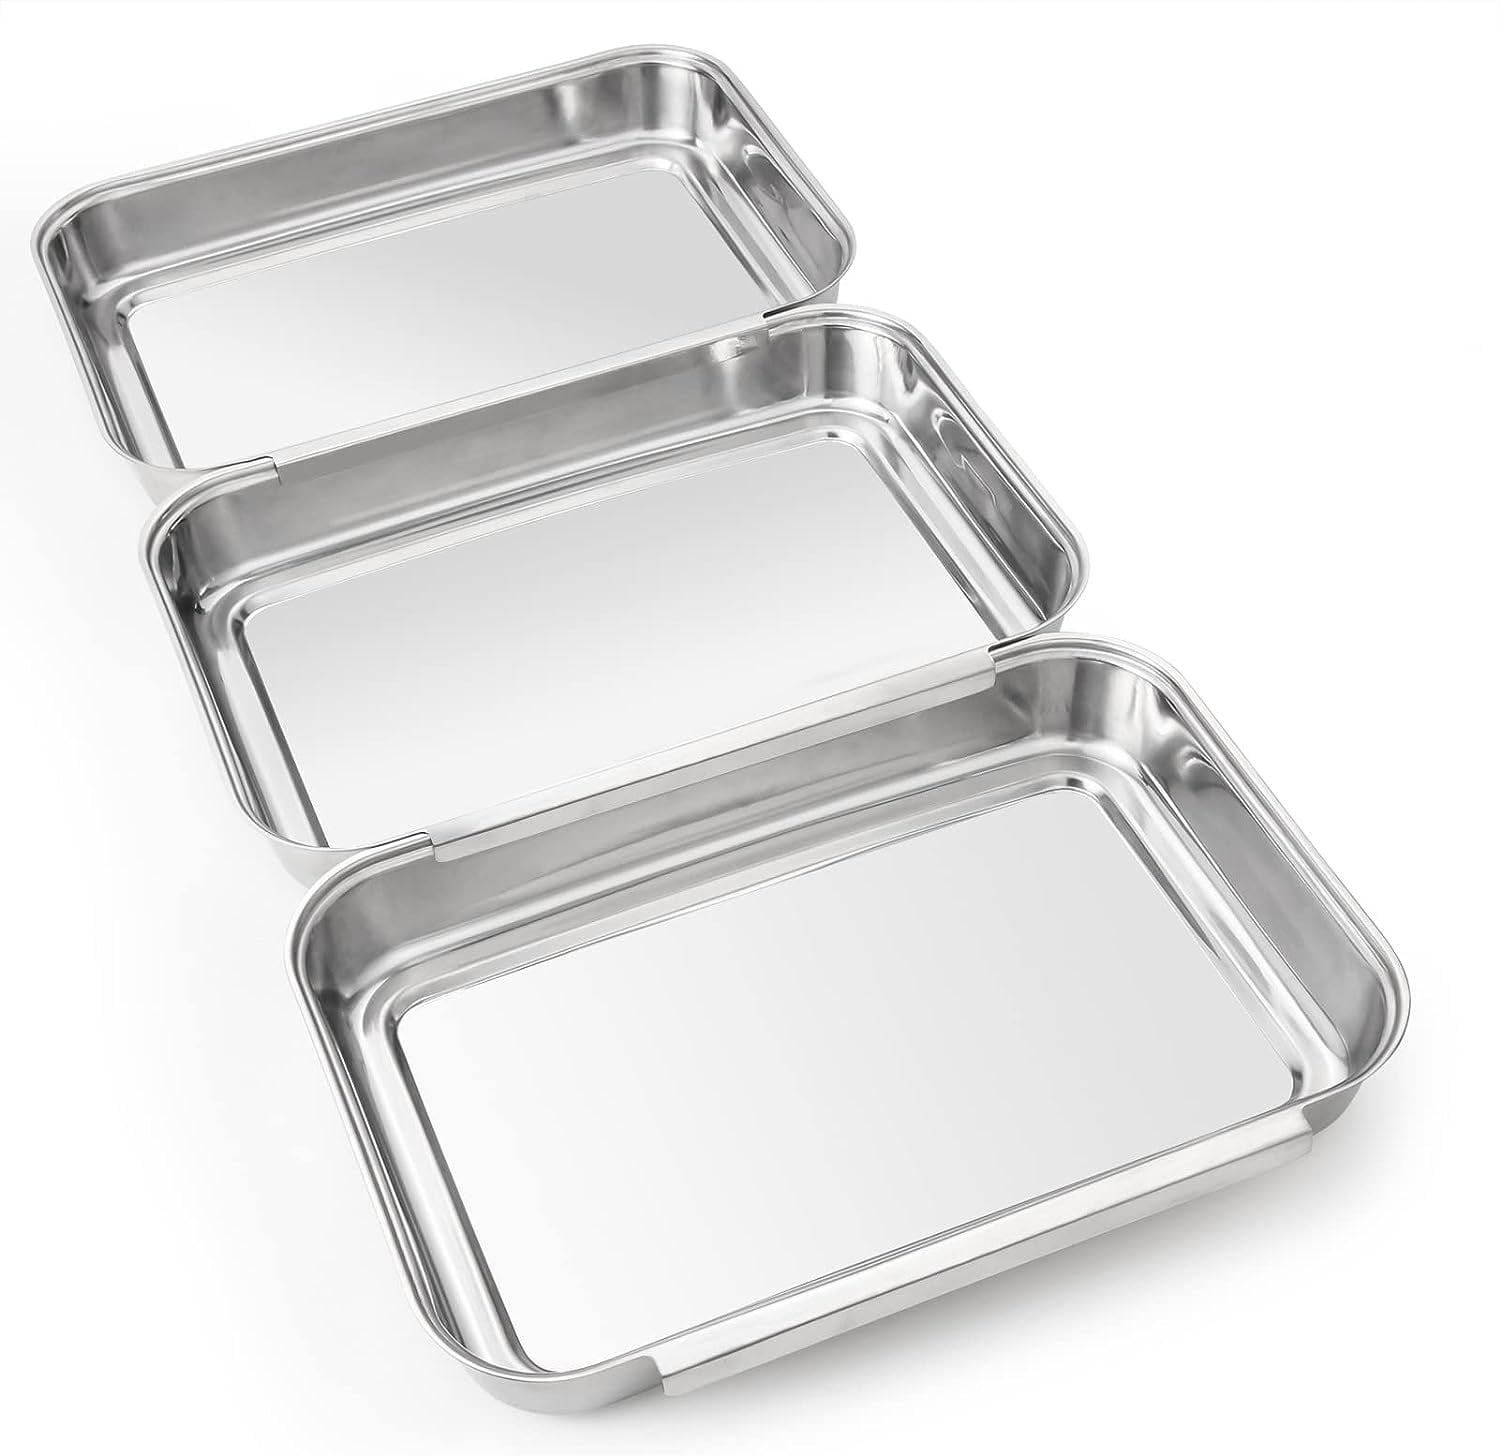 Breading Trays Set of 3 Large 10.4 x 7.7 x 1.9 Inch Stainless